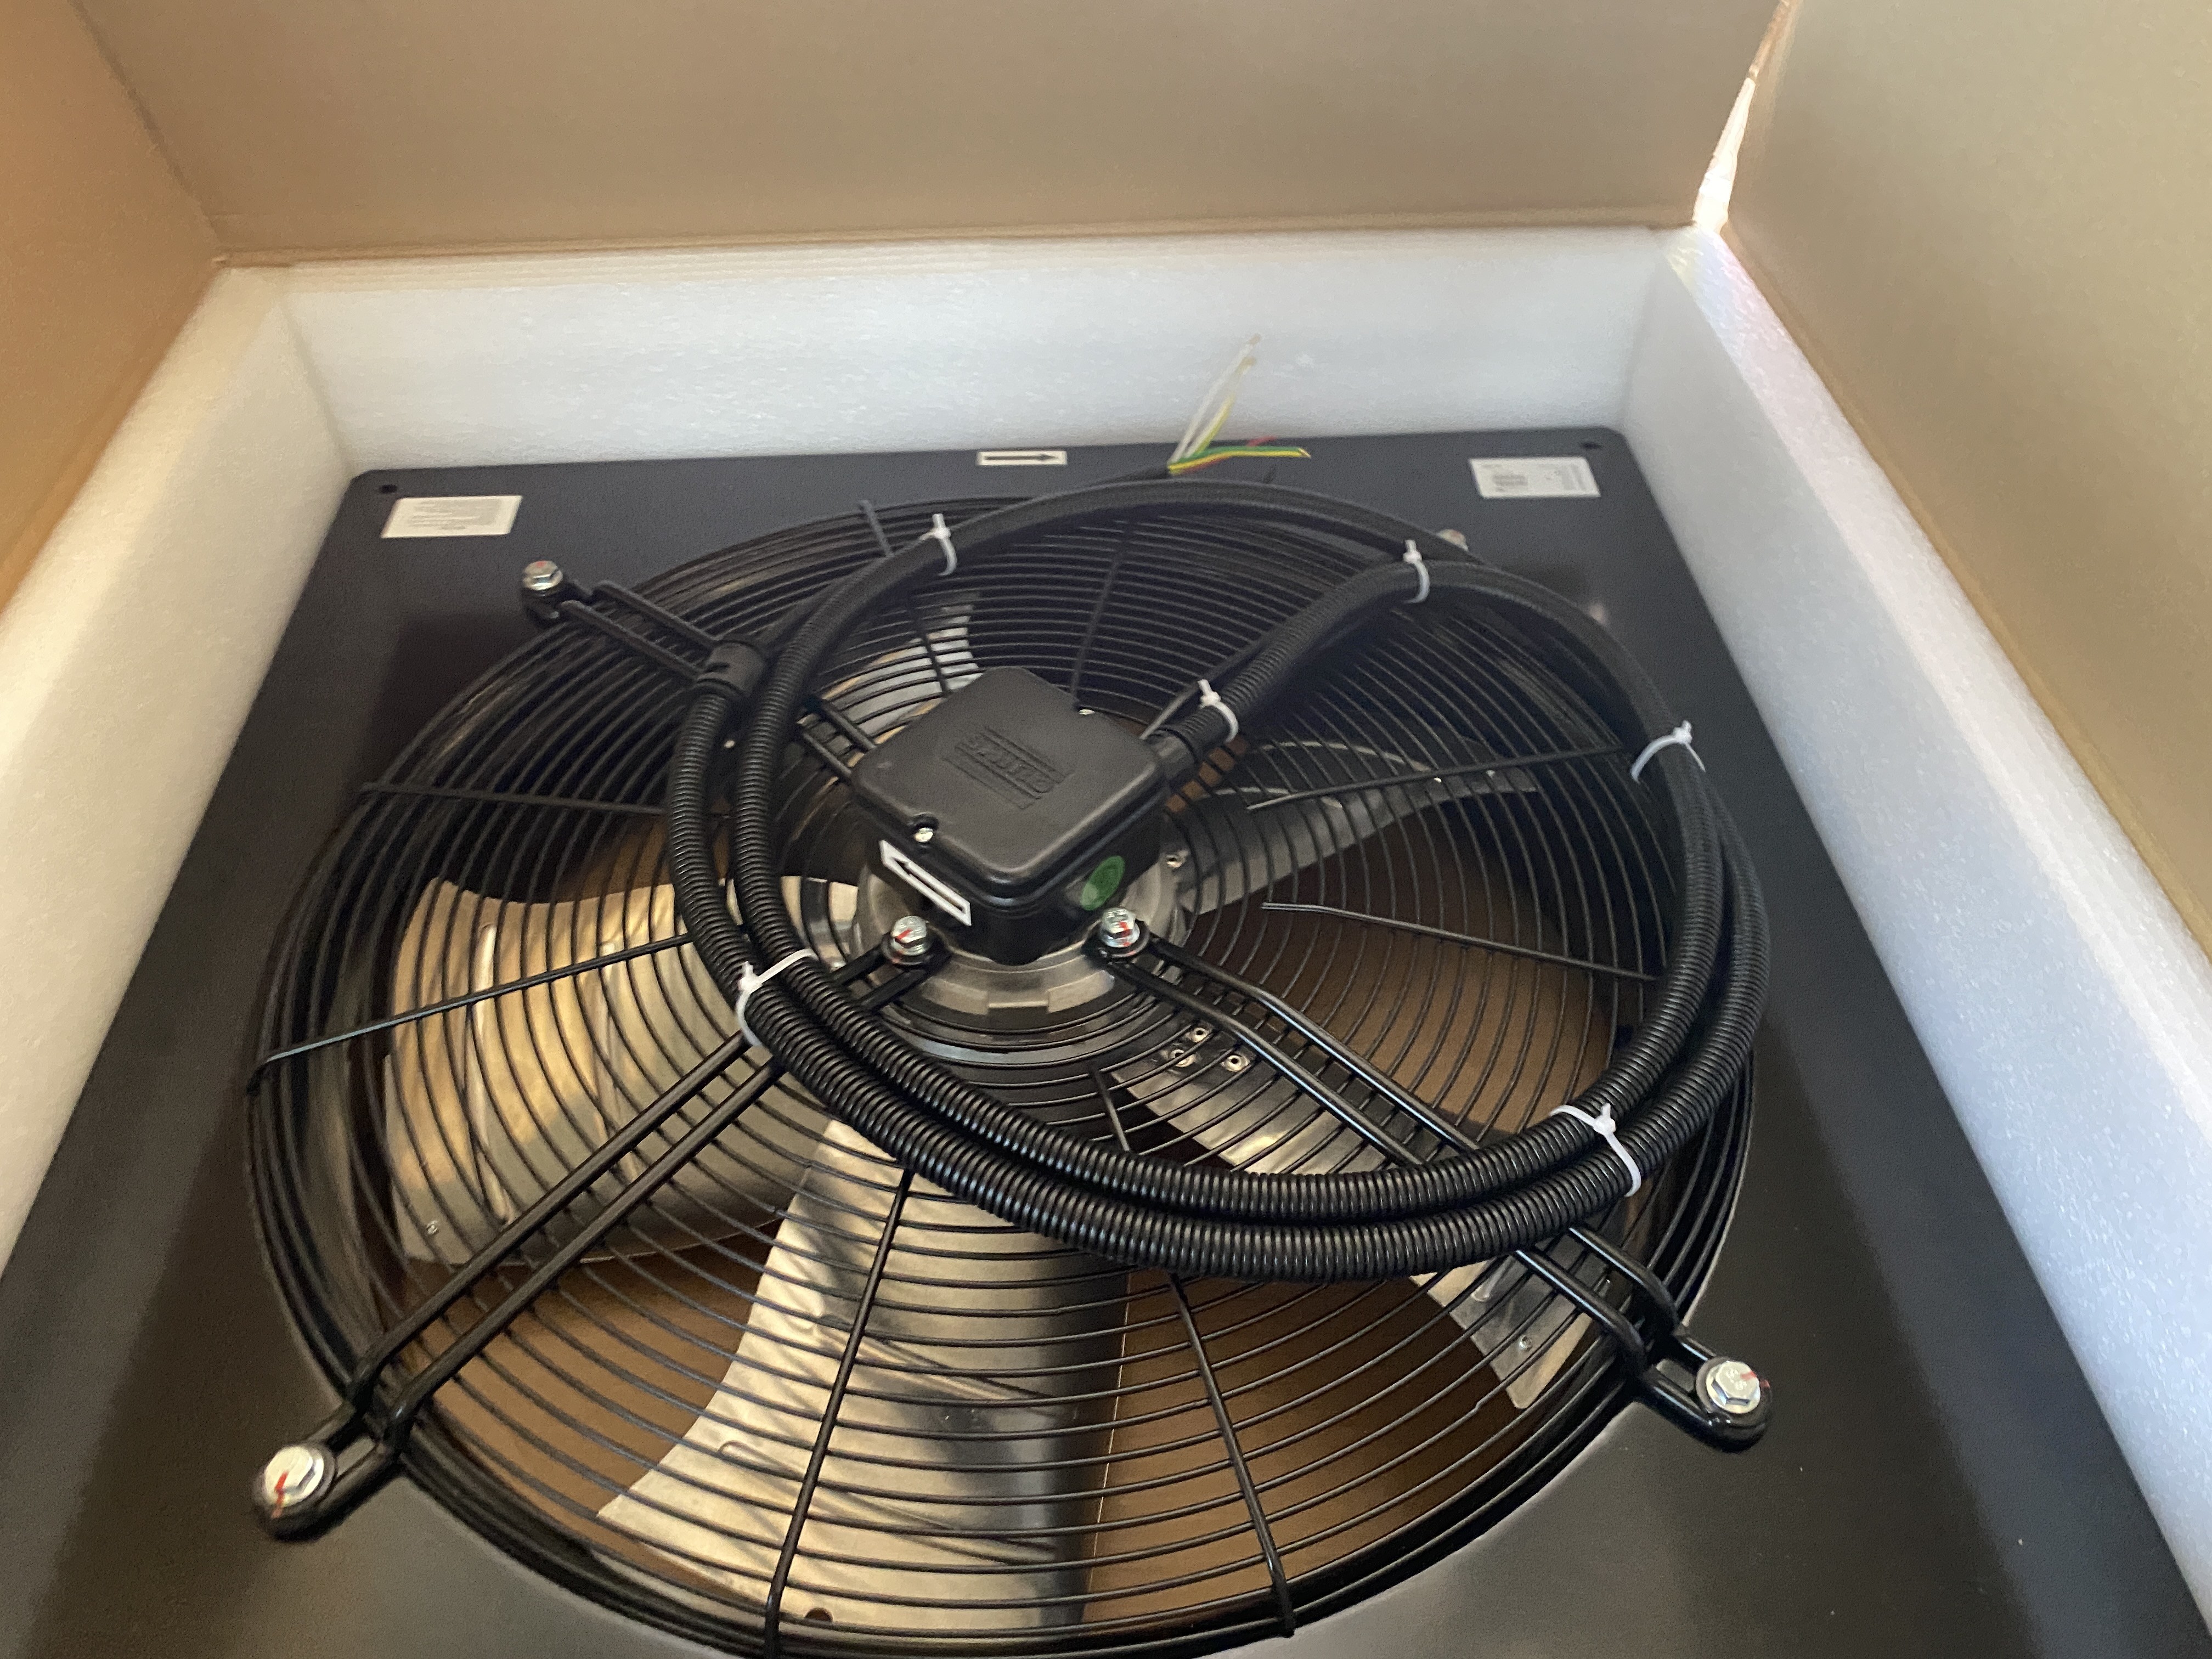  ALA 560D4-4S00-T AC Axial Fan Manufactures